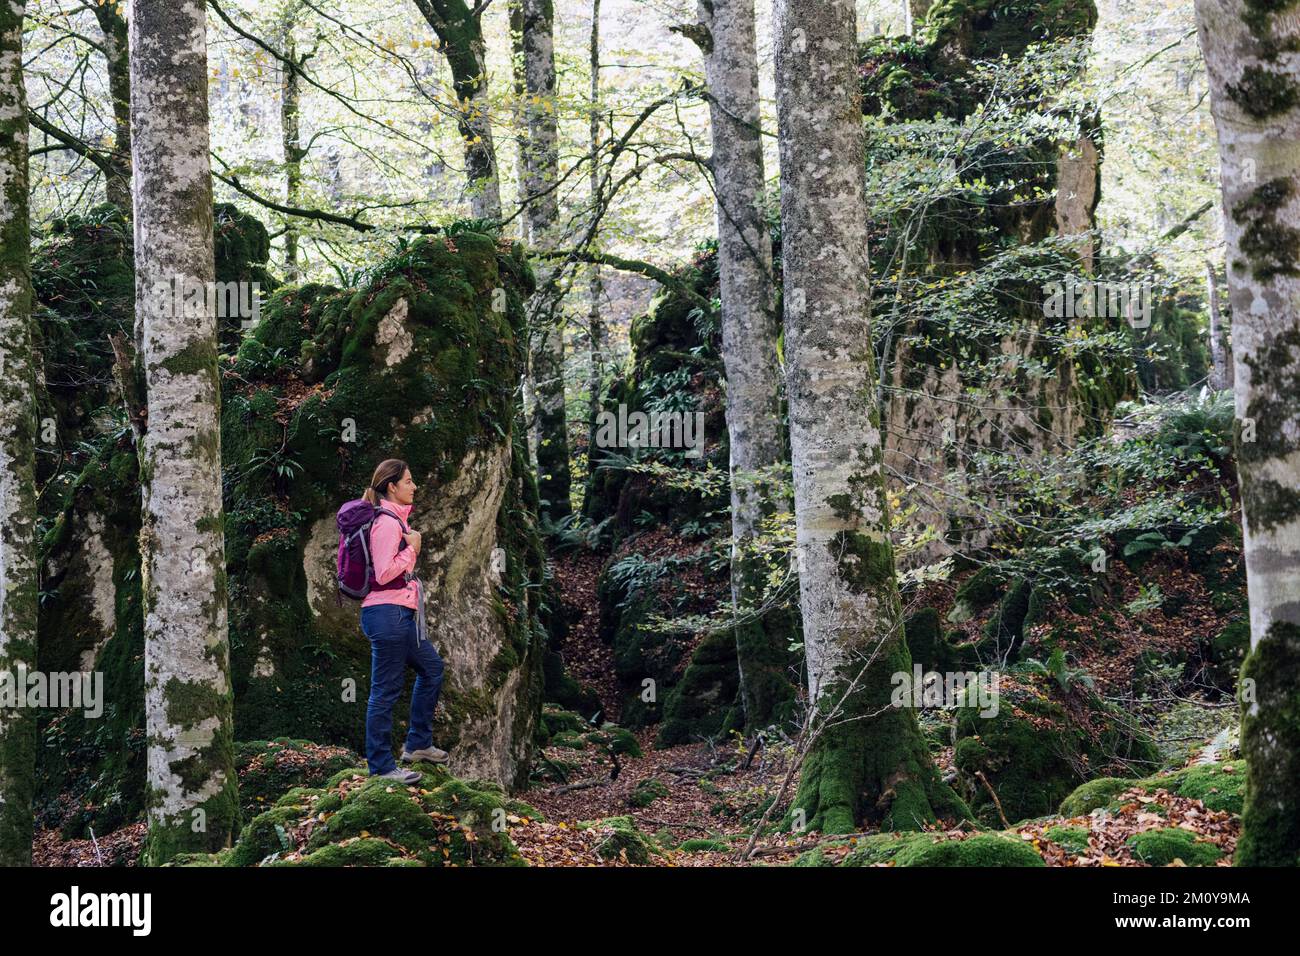 Female backpacker admiring the autumn forest. Stock Photo